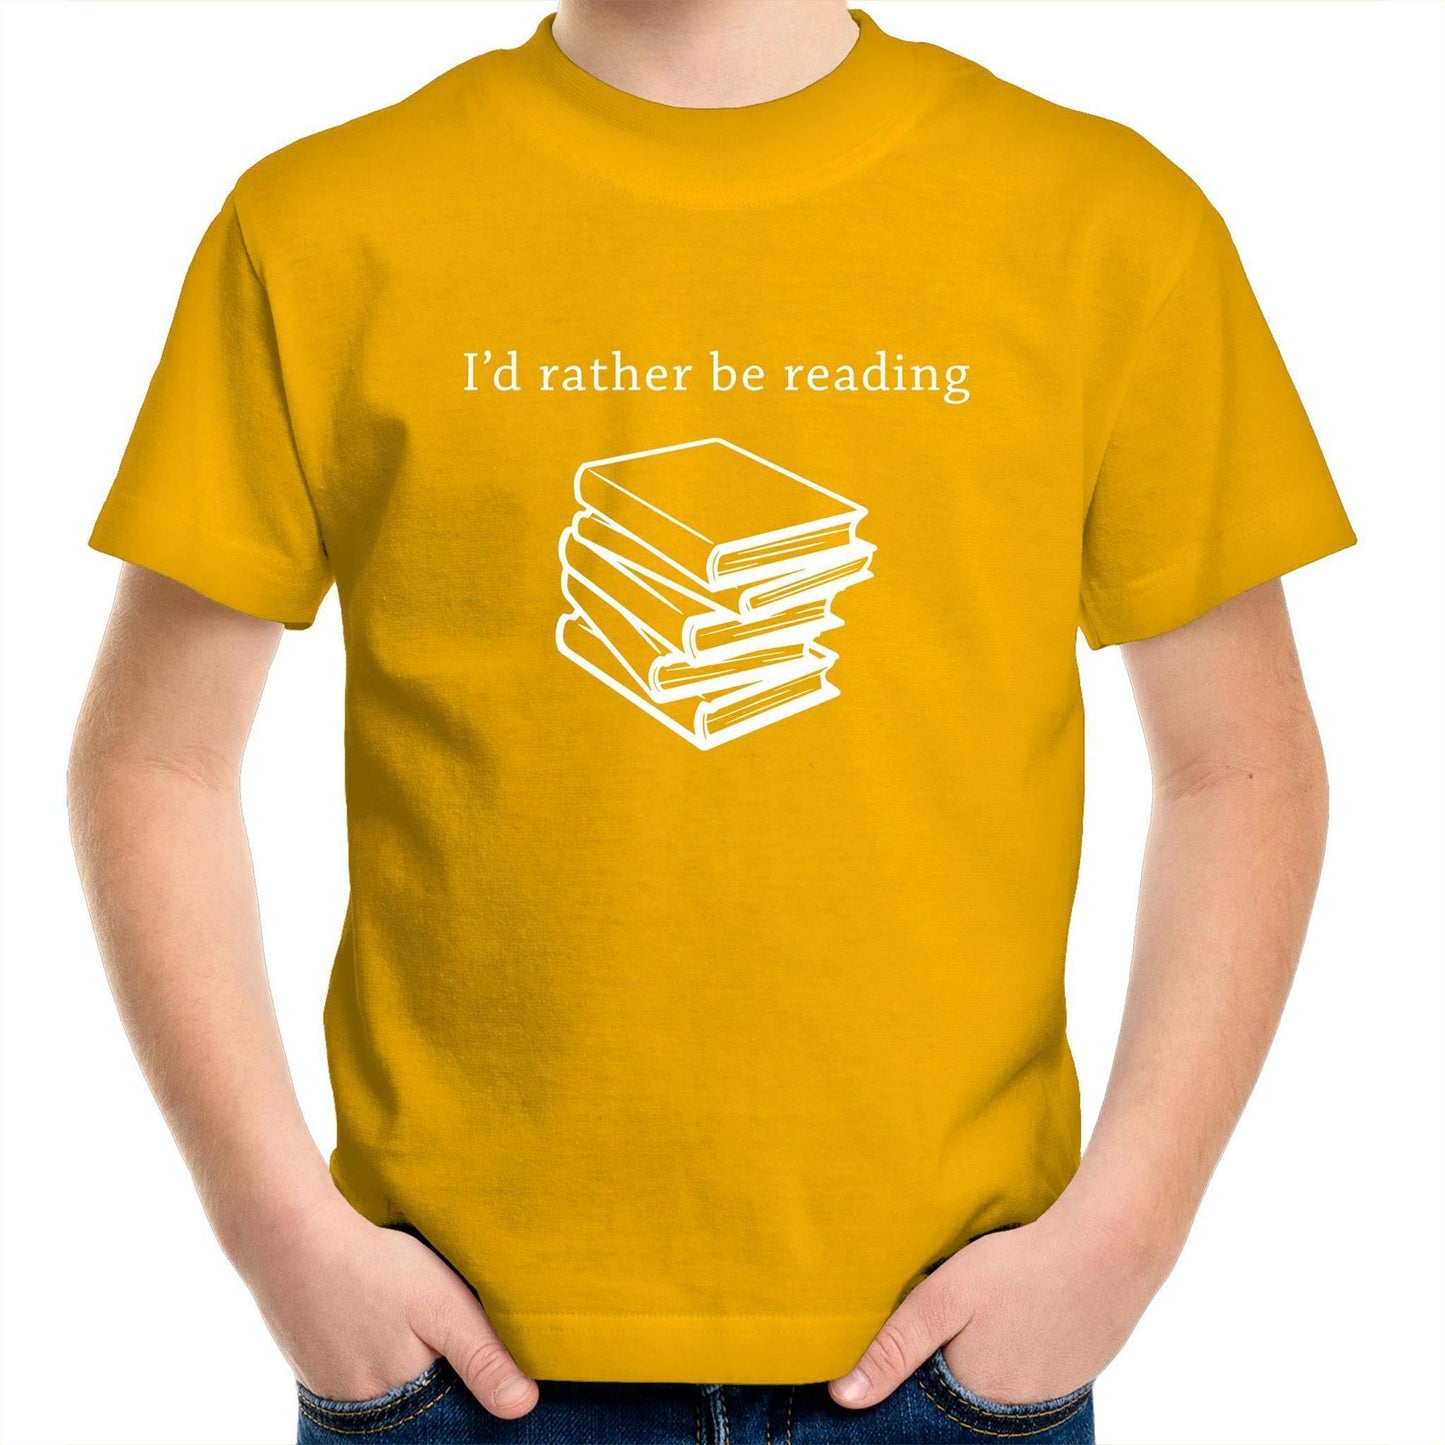 I'd Rather Be Reading - Kids Youth Crew T-Shirt Gold Kids Youth T-shirt Funny